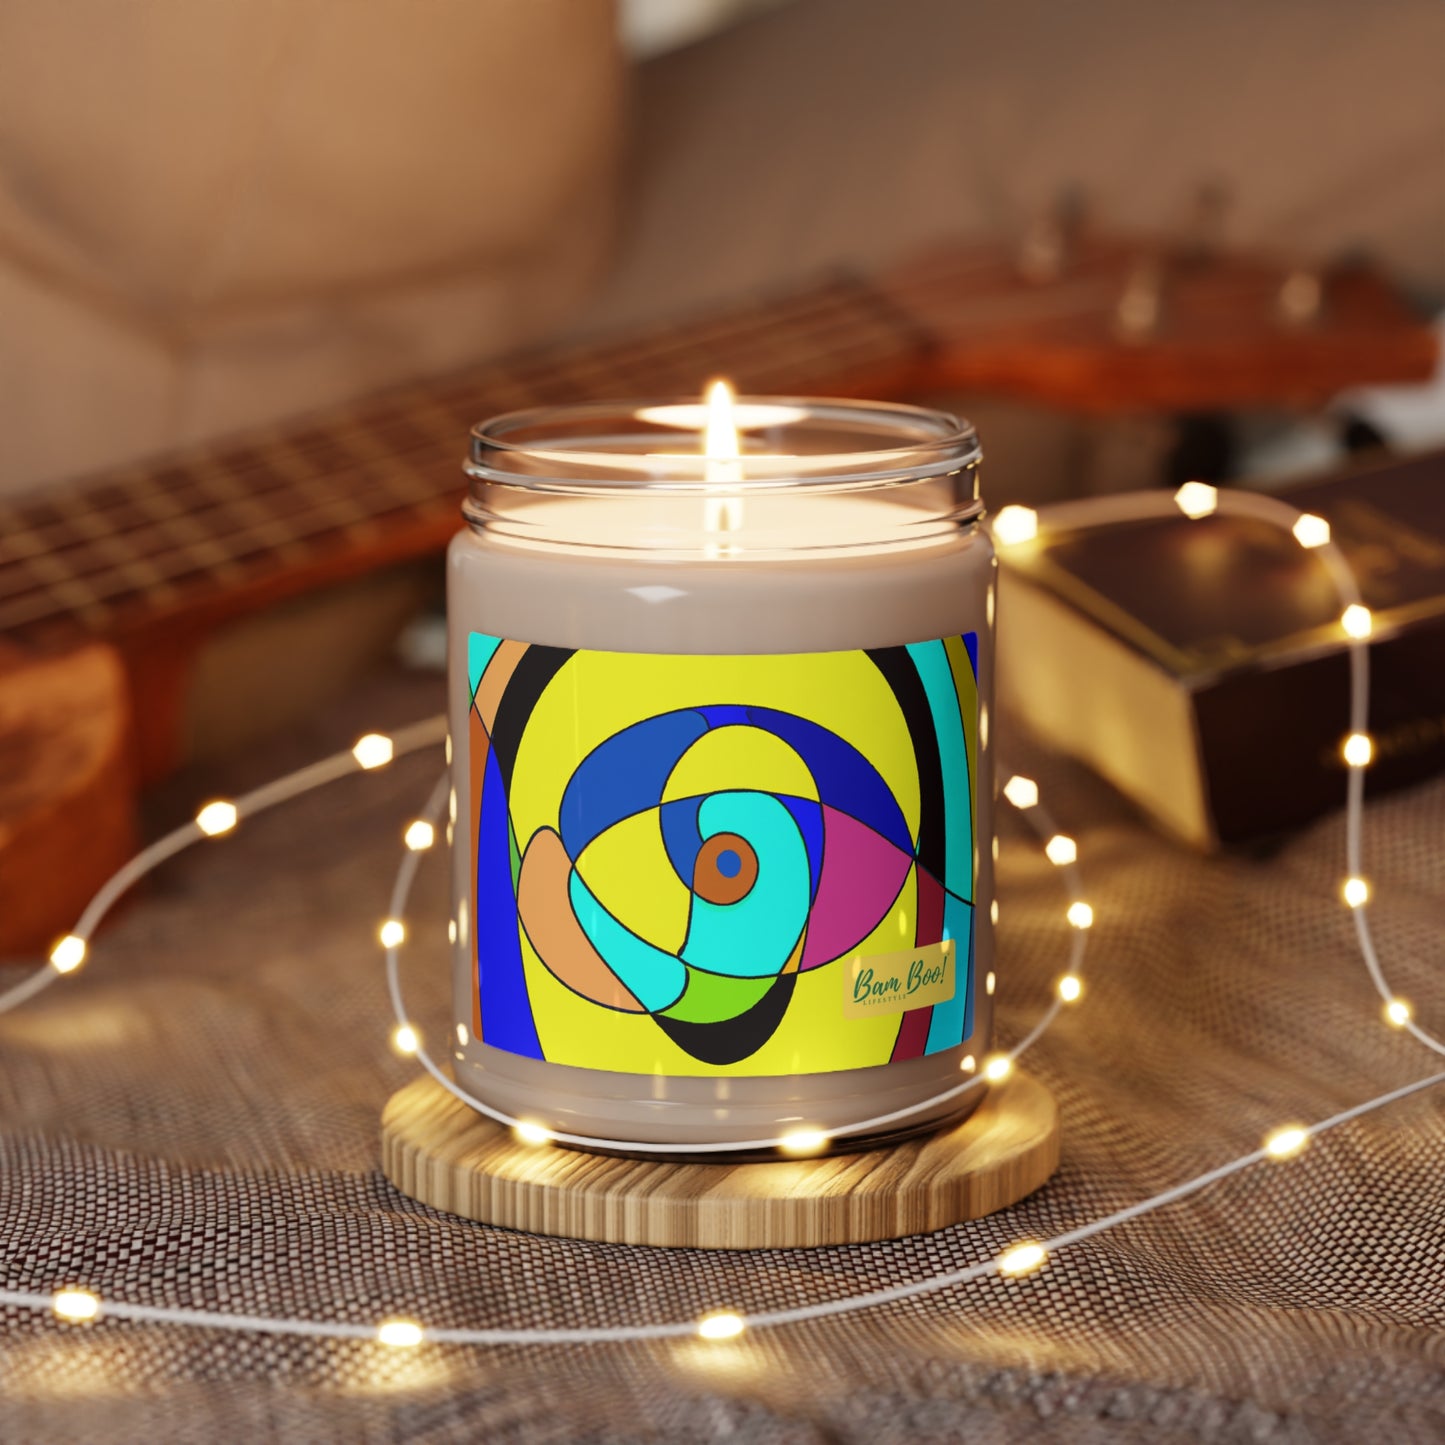 "The Prism of Emotions" - Bam Boo! Lifestyle Eco-friendly Soy Candle